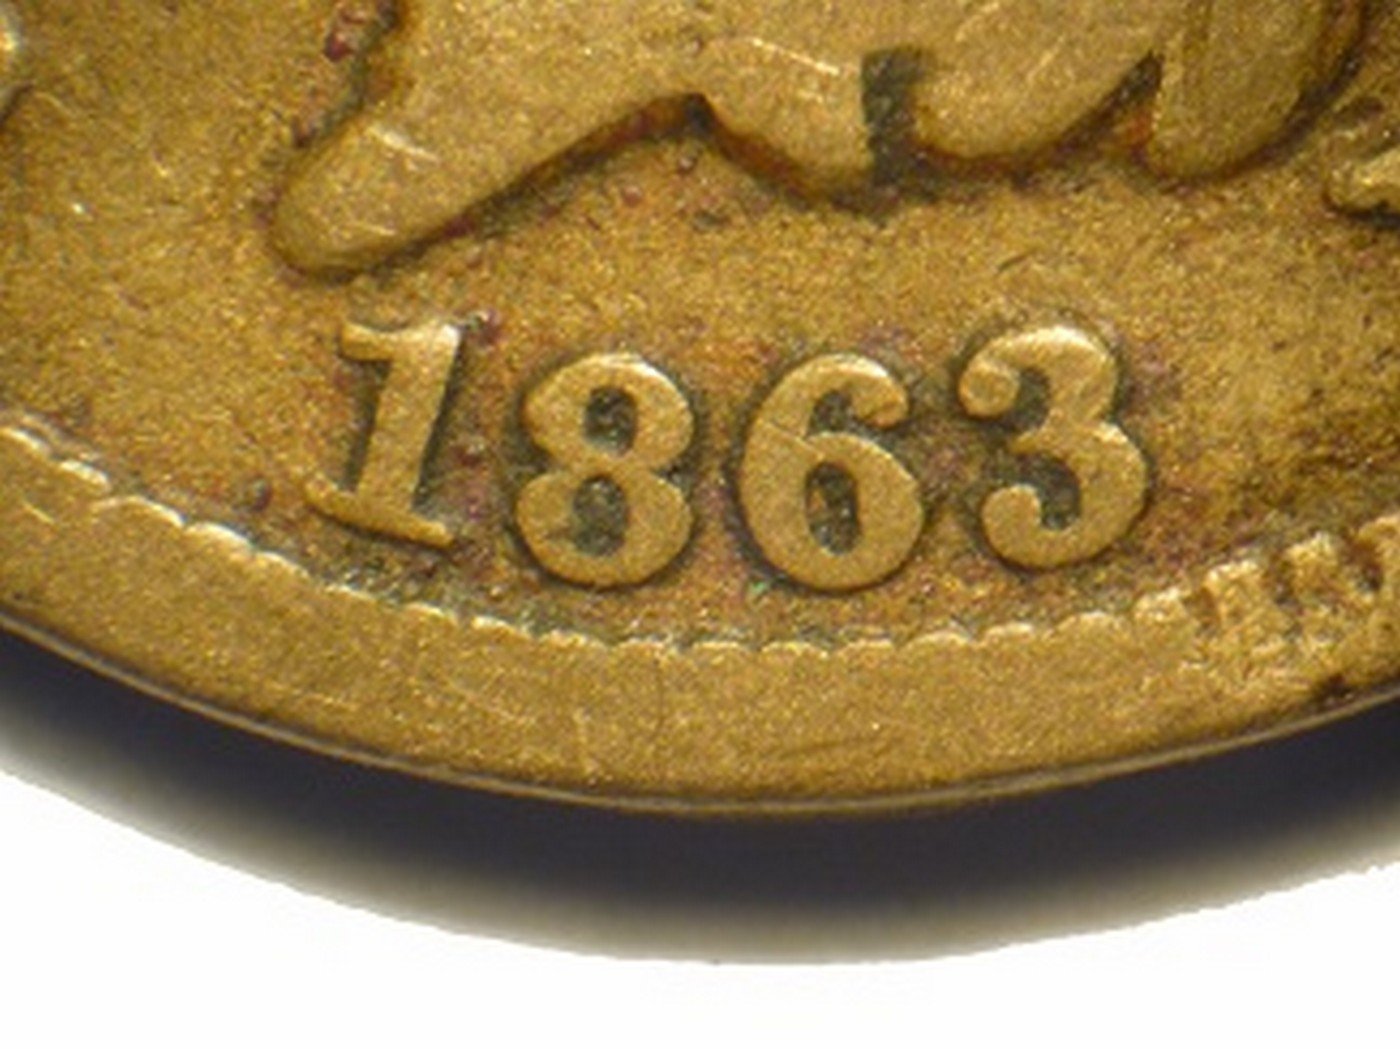 1863 Obverse of CUD-021 - Indian Head Penny - Photo by David Poliquin